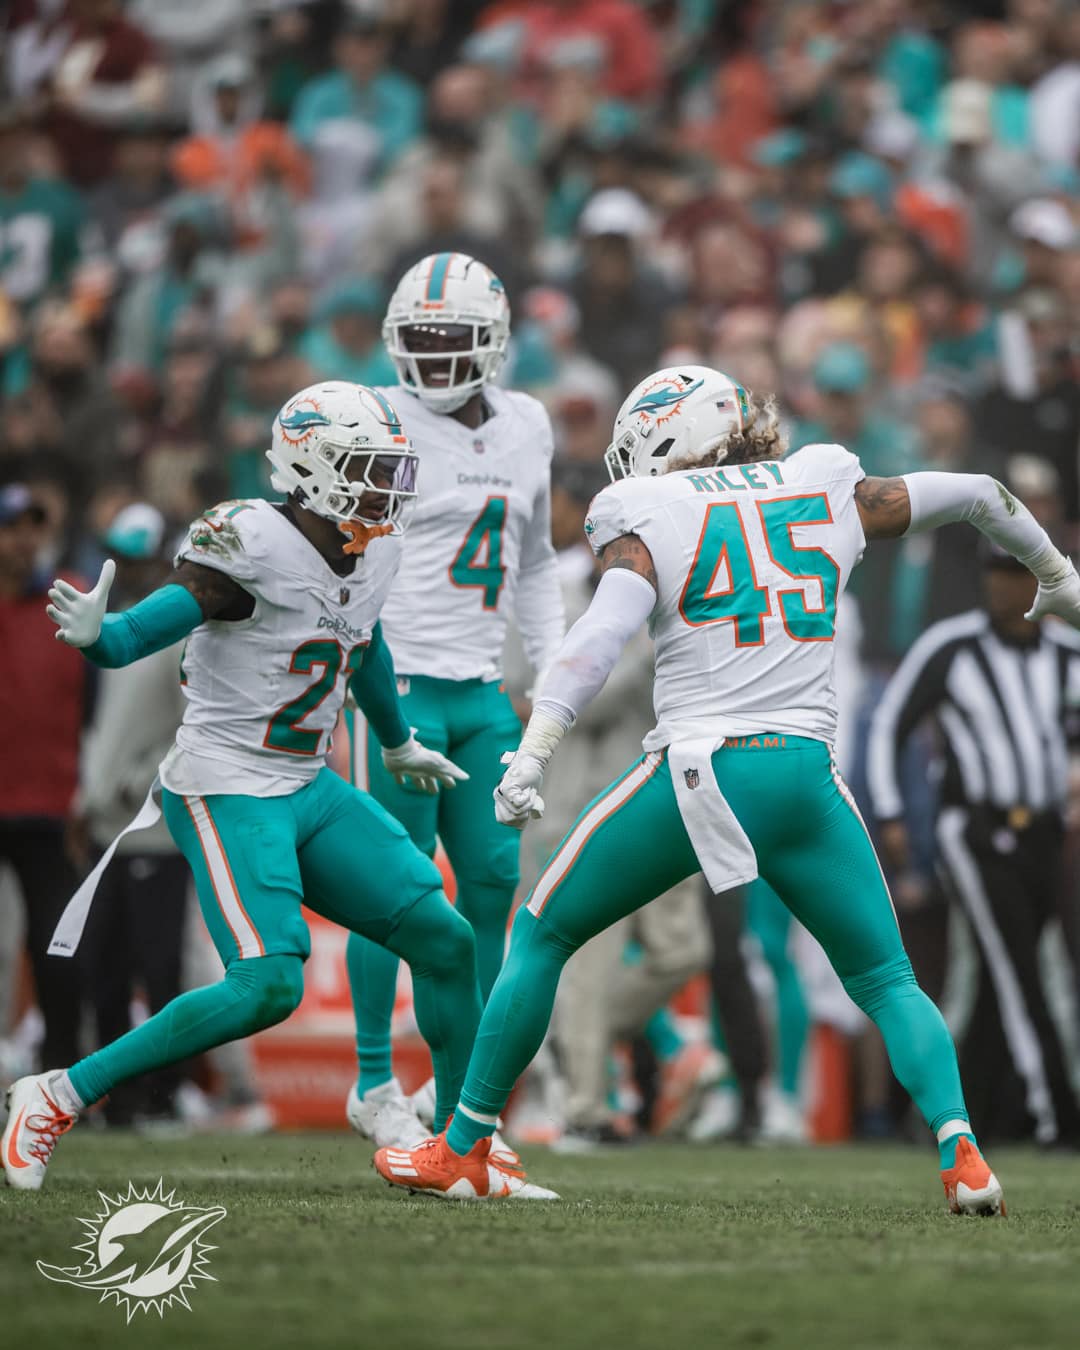 The Miami Dolphins are leaders of the AFC